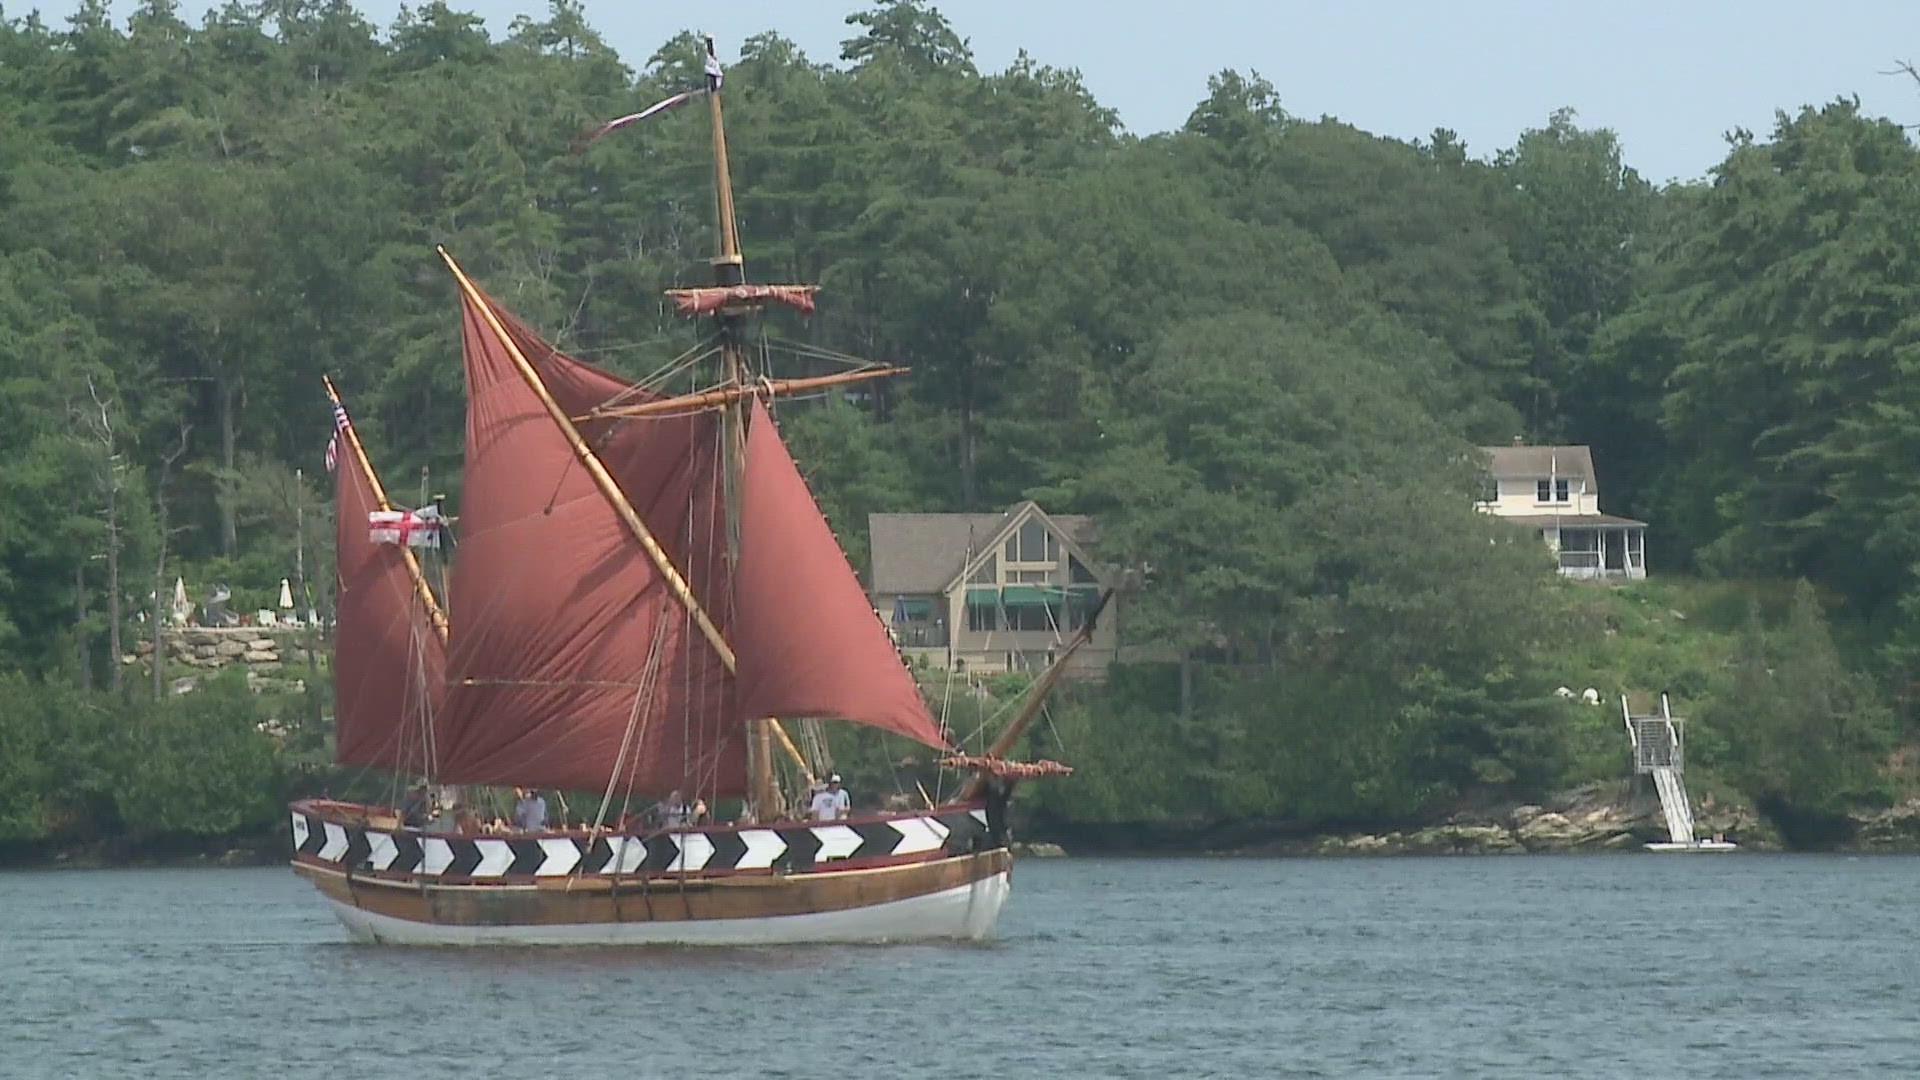 The Virginia is a replica of a ship built in 1607, along the shore of the Kennebec River, by the Popham Colony.